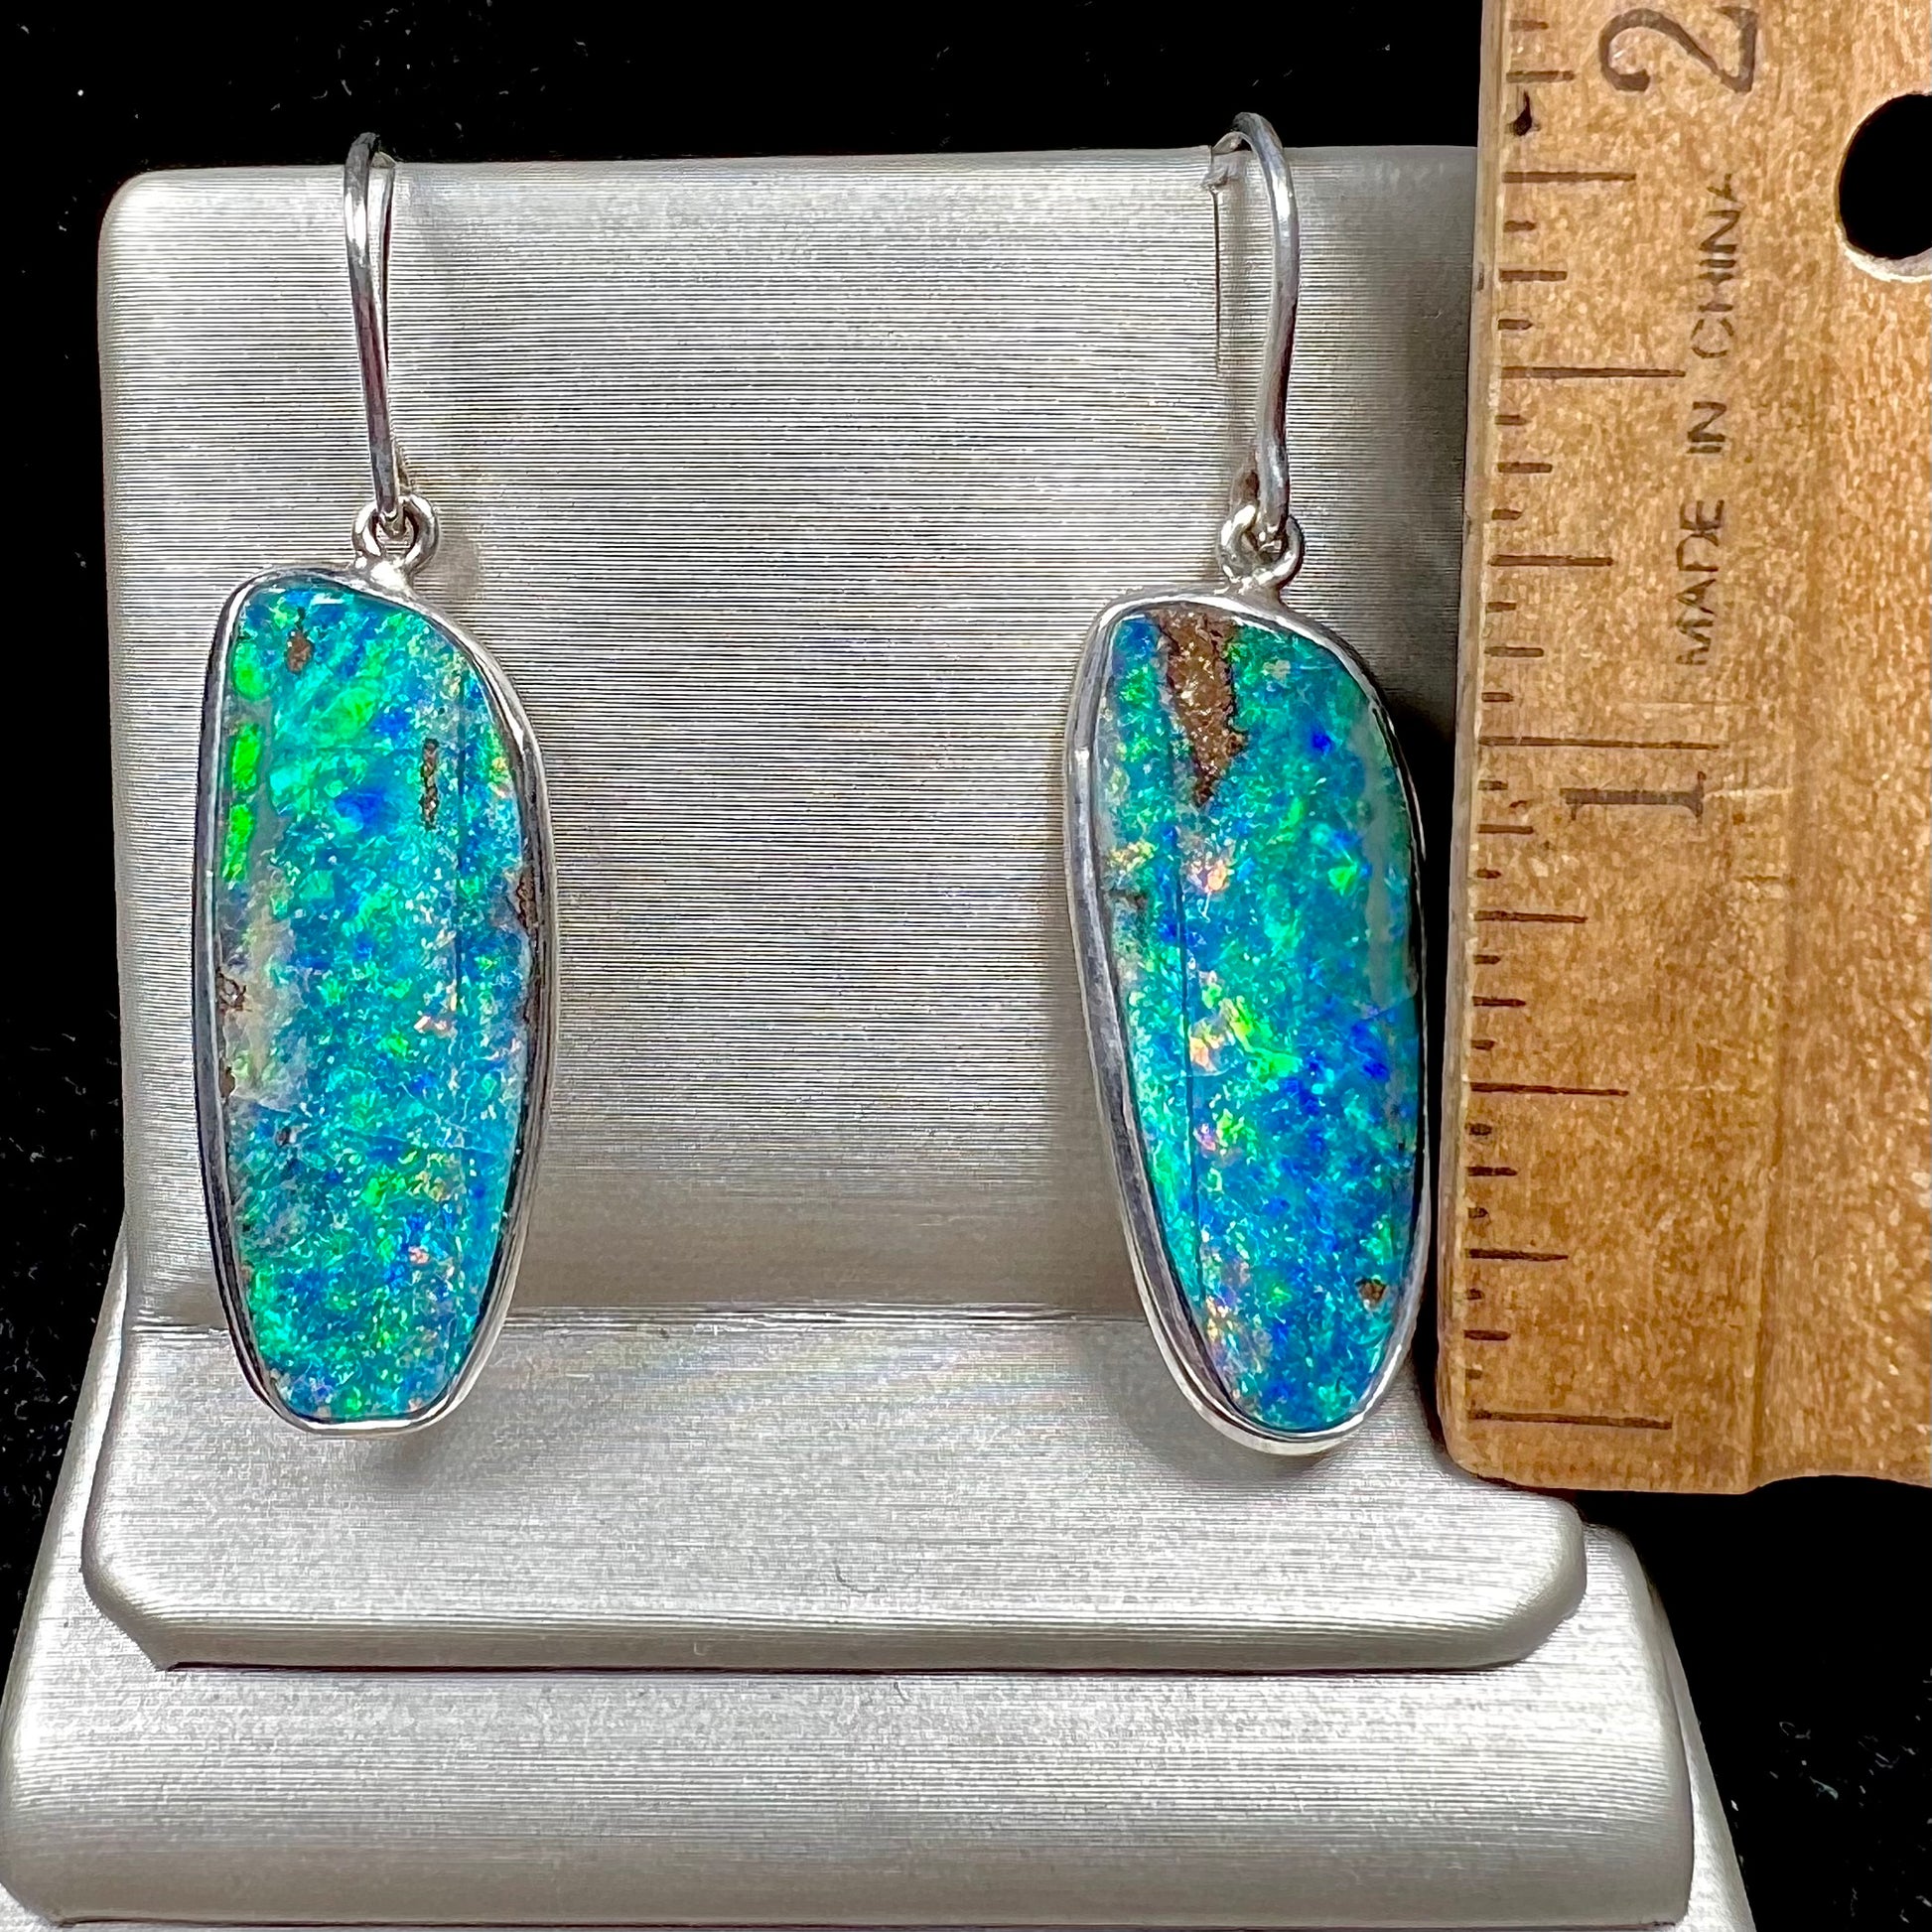 A pair of white gold boulder opal French wire dangle earrings.  The opal is predominantly glimmery blue.